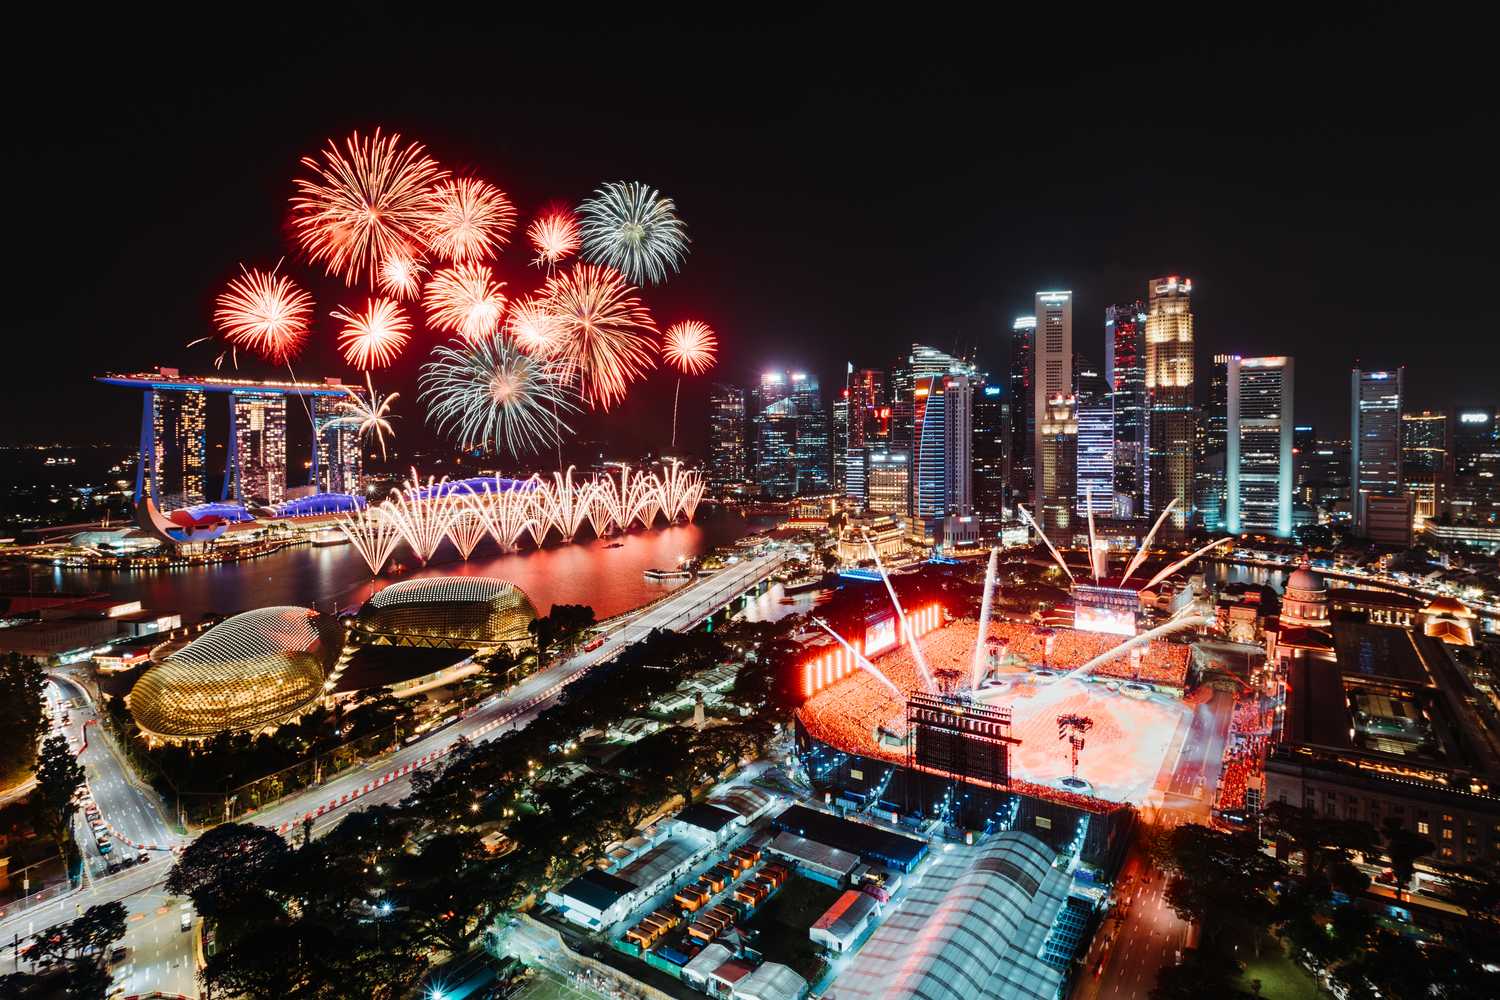 Vibrant red and white fireworks are seen with the skyline of Singapore's iconic buildings like the Marina Bay Sands Hotel in the background. The night sky is filled with the red, blue, white, purple, turquoise, and yellow lights from the buildings surrounding the float.